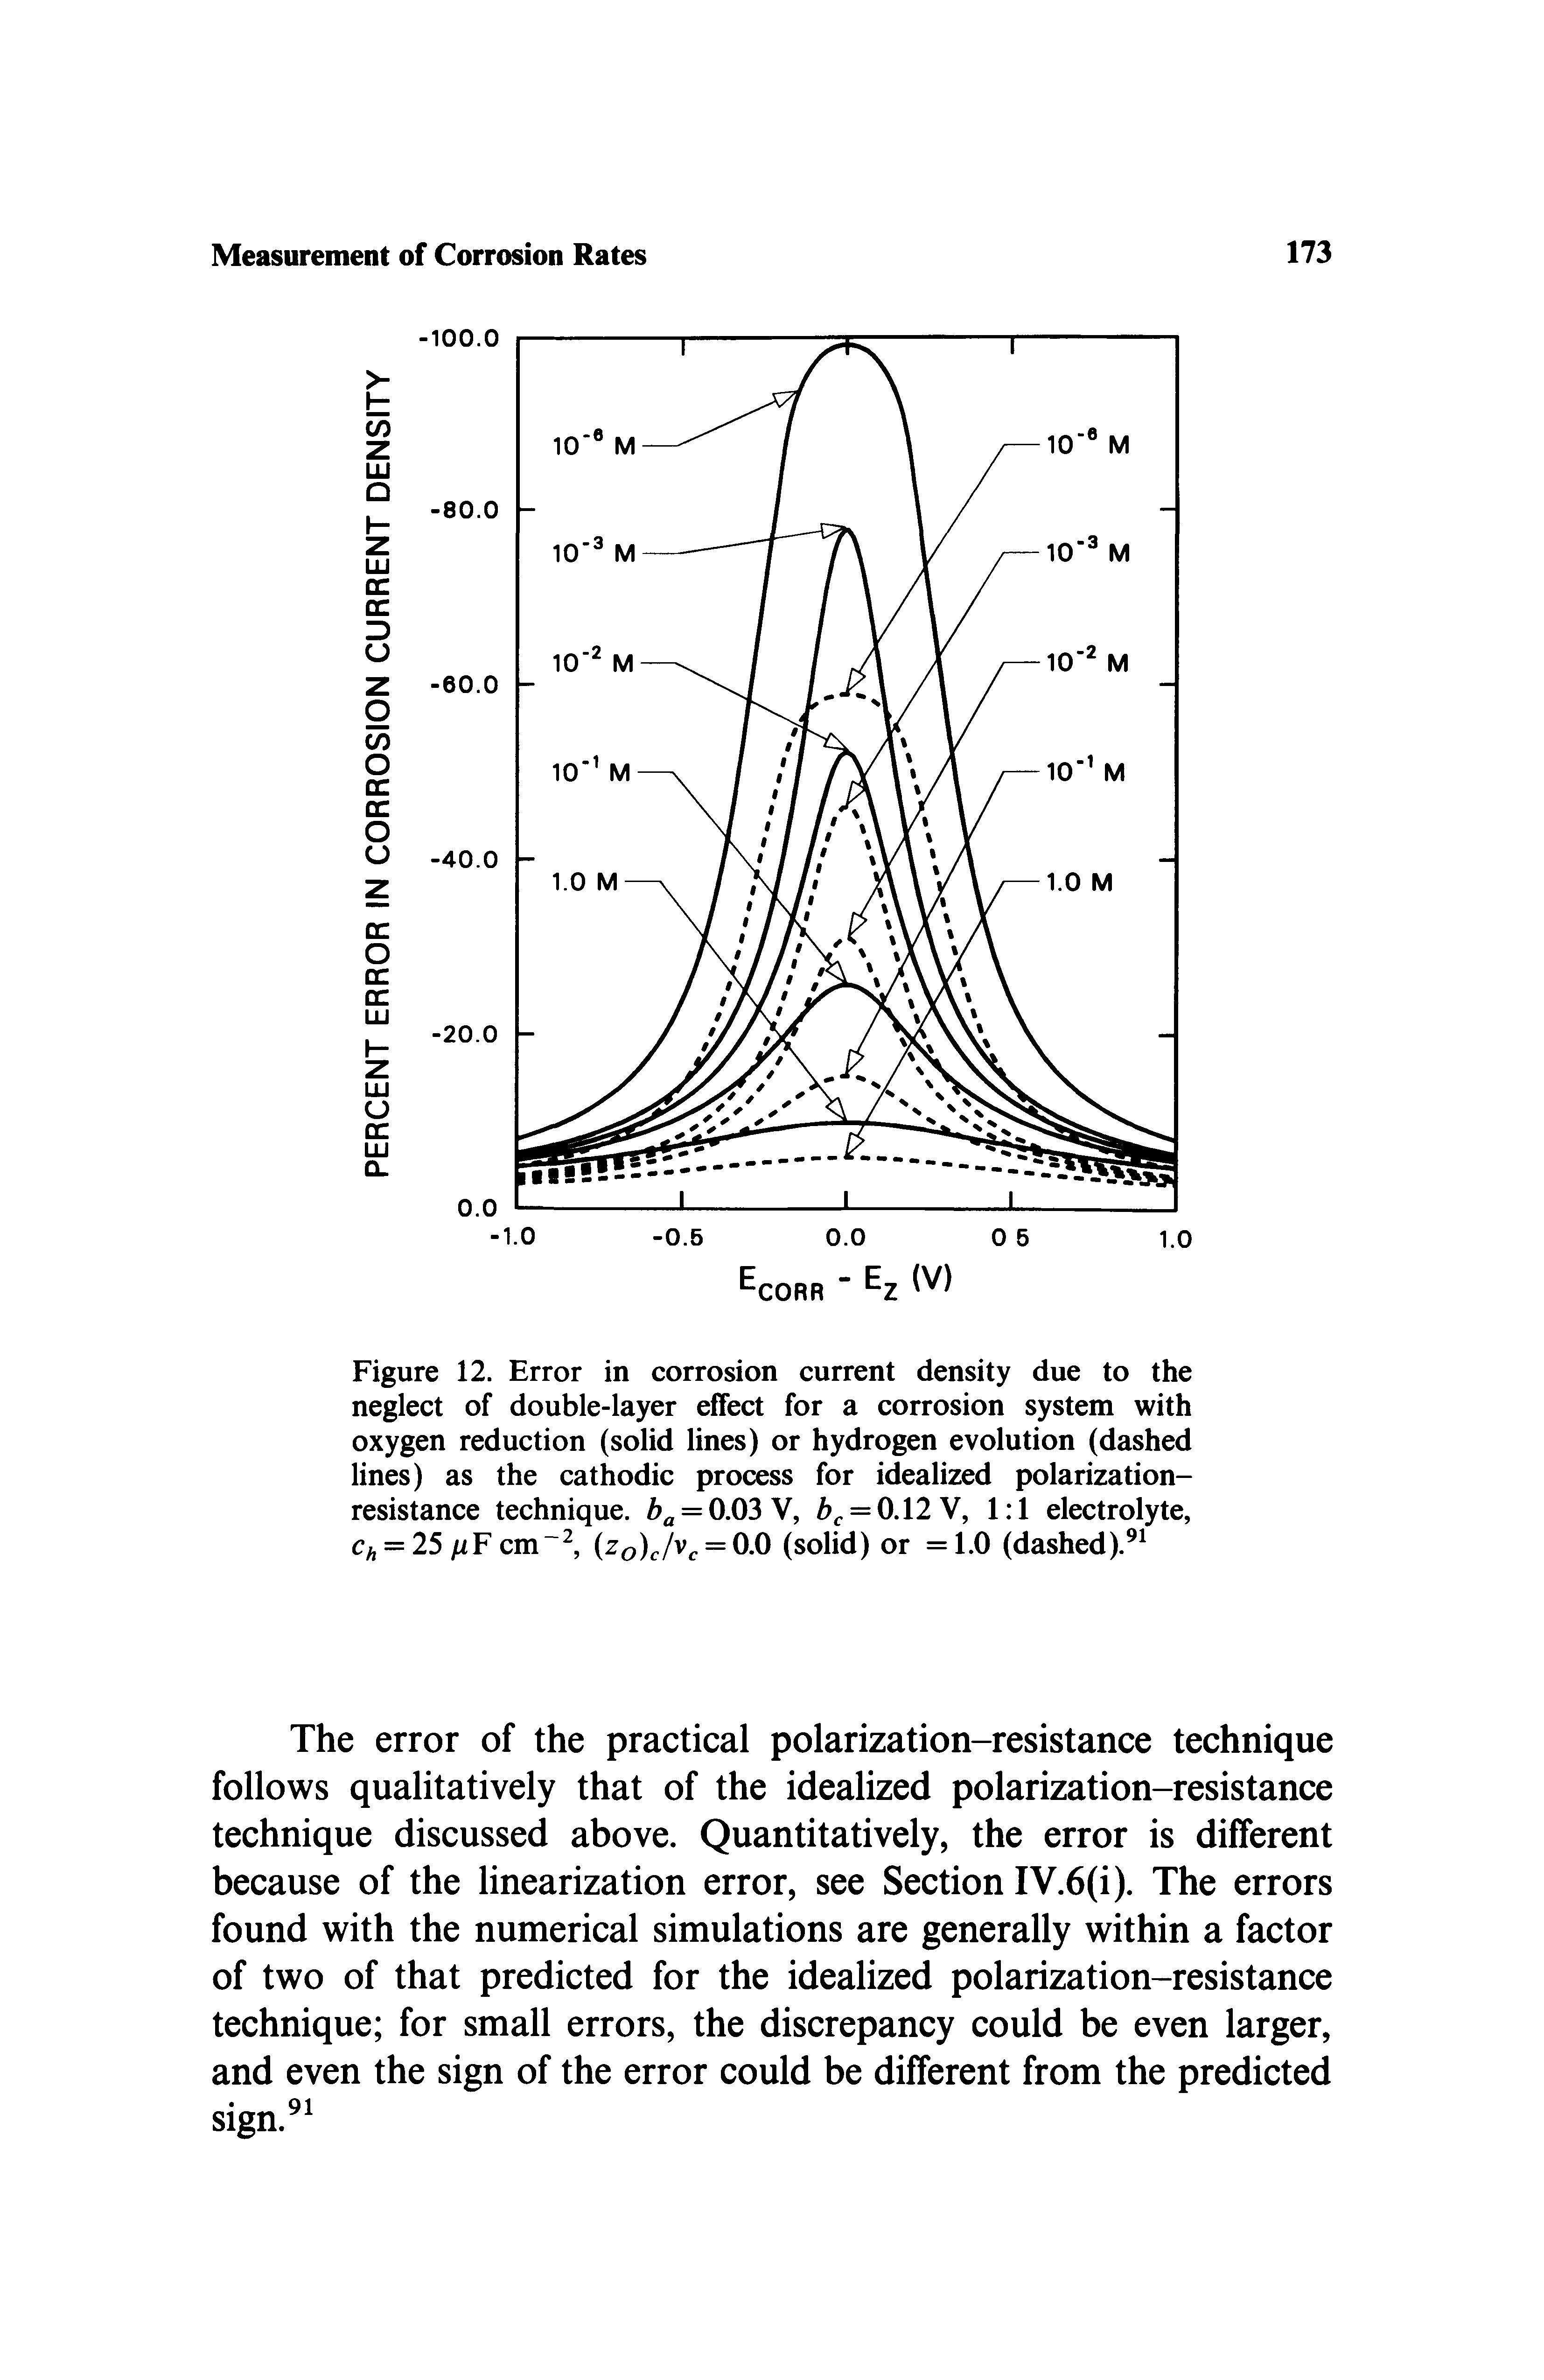 Figure 12. Error in corrosion current density due to the neglect of double-layer effect for a corrosion system with oxygen reduction (solid lines) or hydrogen evolution (dashed lines) as the cathodic process for idealized polarization-resistance technique. = 0.03 V, = 0.12 V, 1 1 electrolyte, Ch-2S ii cm (zo) /v = 0.0 (solid) or =1.0 (dashed). ...